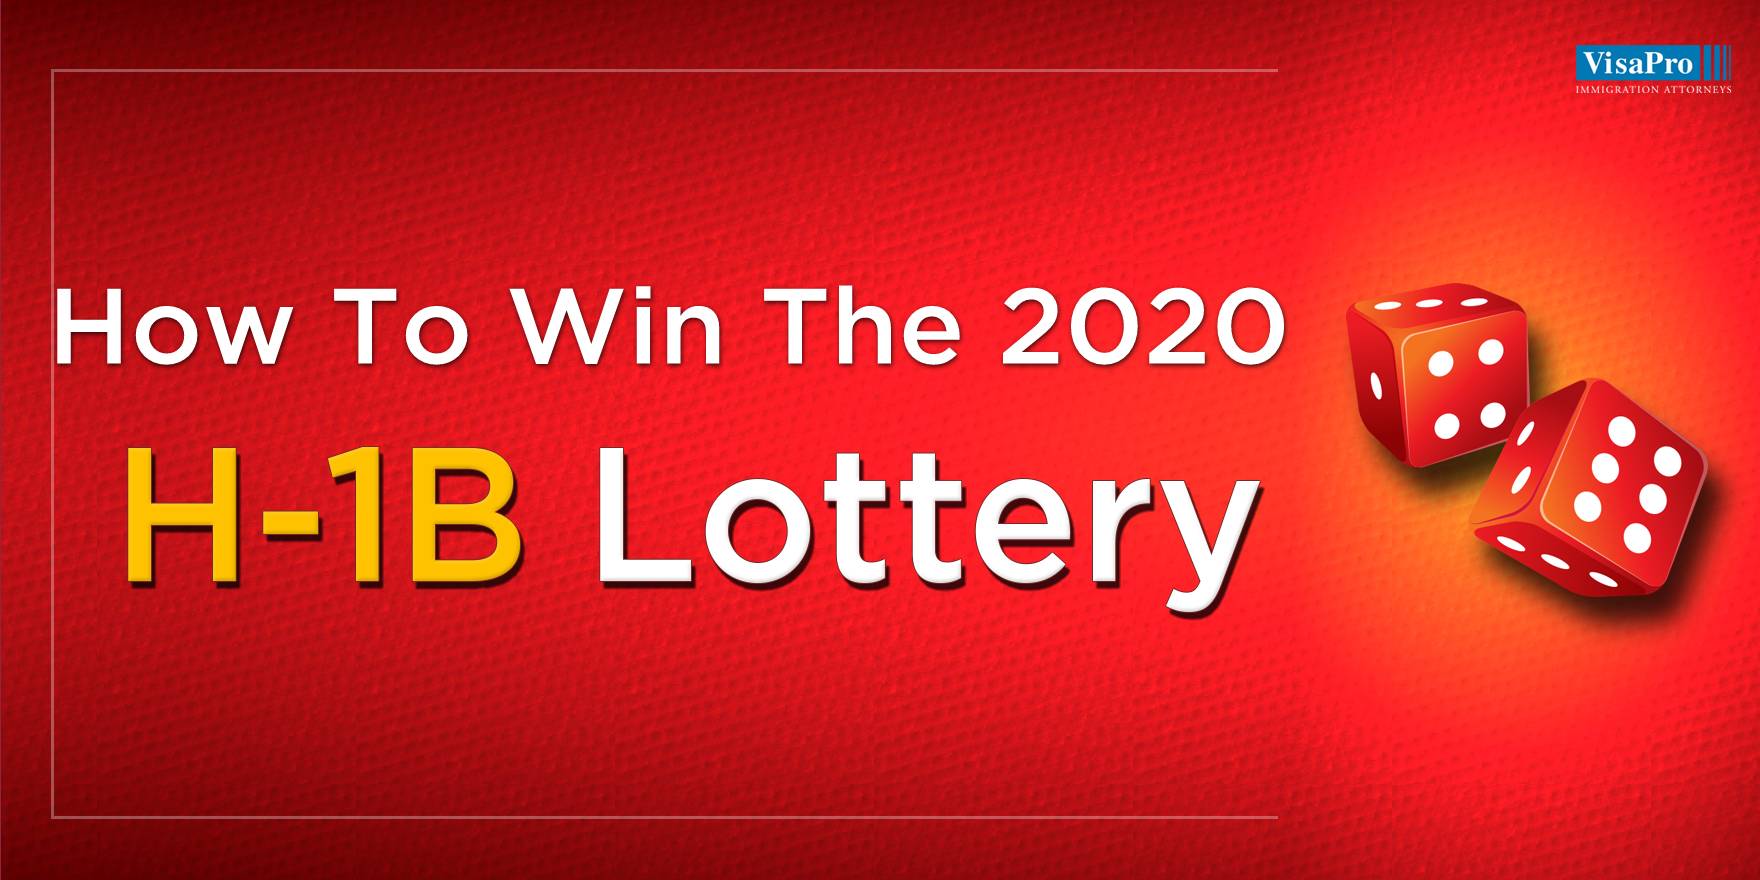 H-1B Cap 2020: How To Increase The Chances Of H-1B Lottery Selection & Approvals, Chula Vista, California, United States